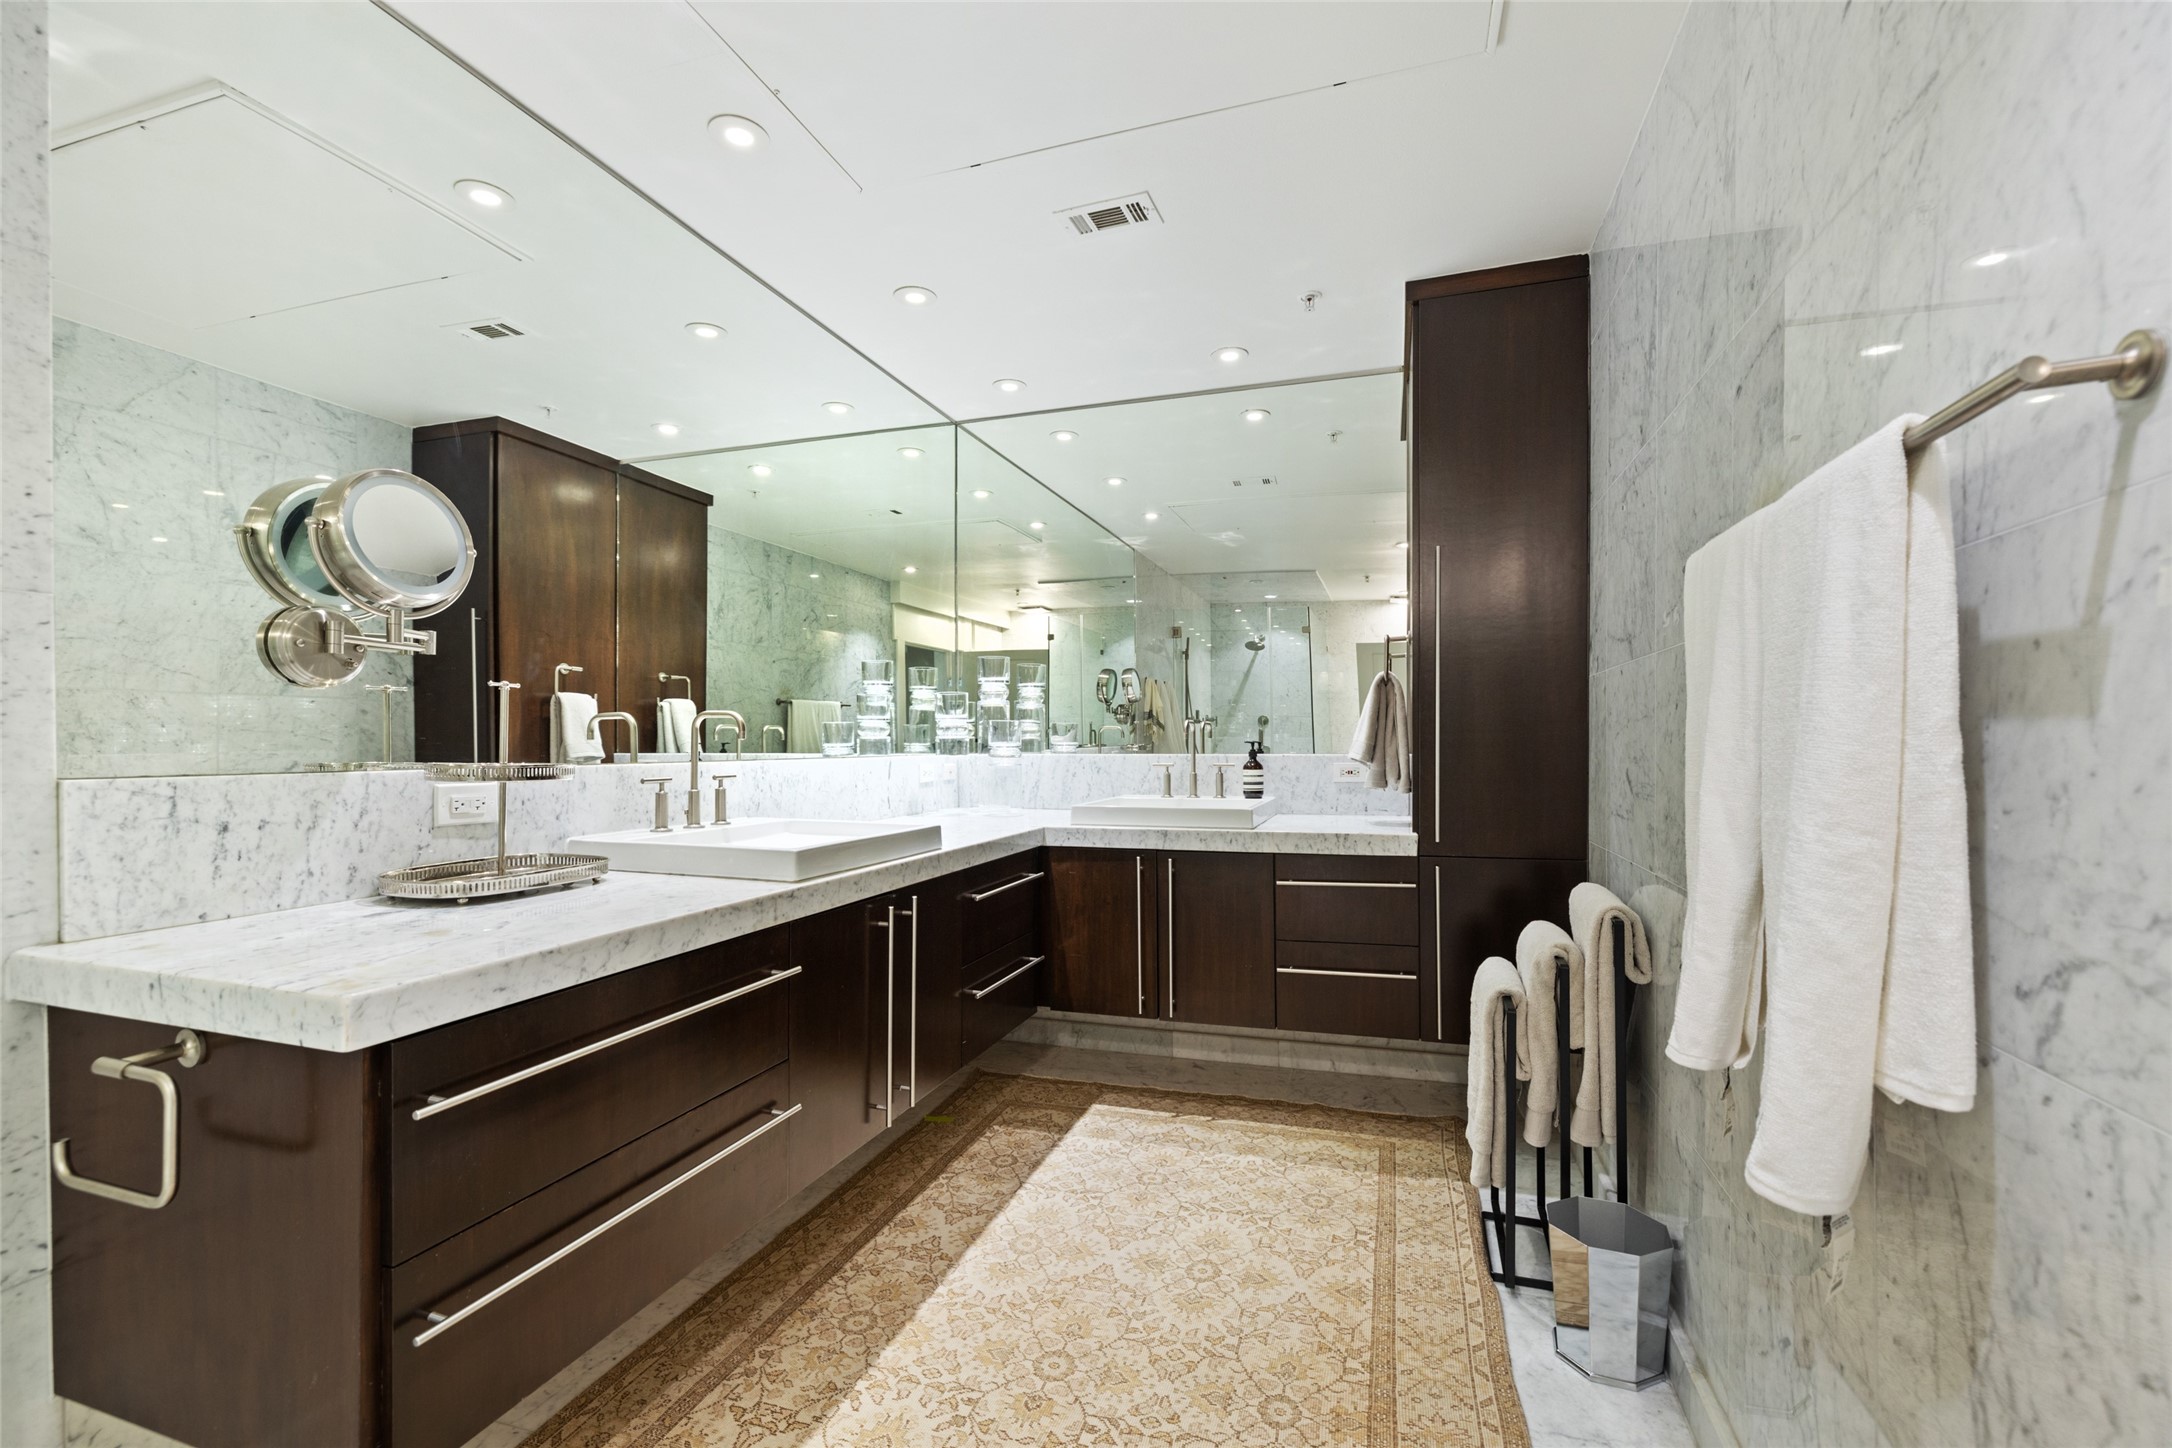 The Primary Bath is both stylish and functional with a large walk in shower, marble counters, and handsome finishes.